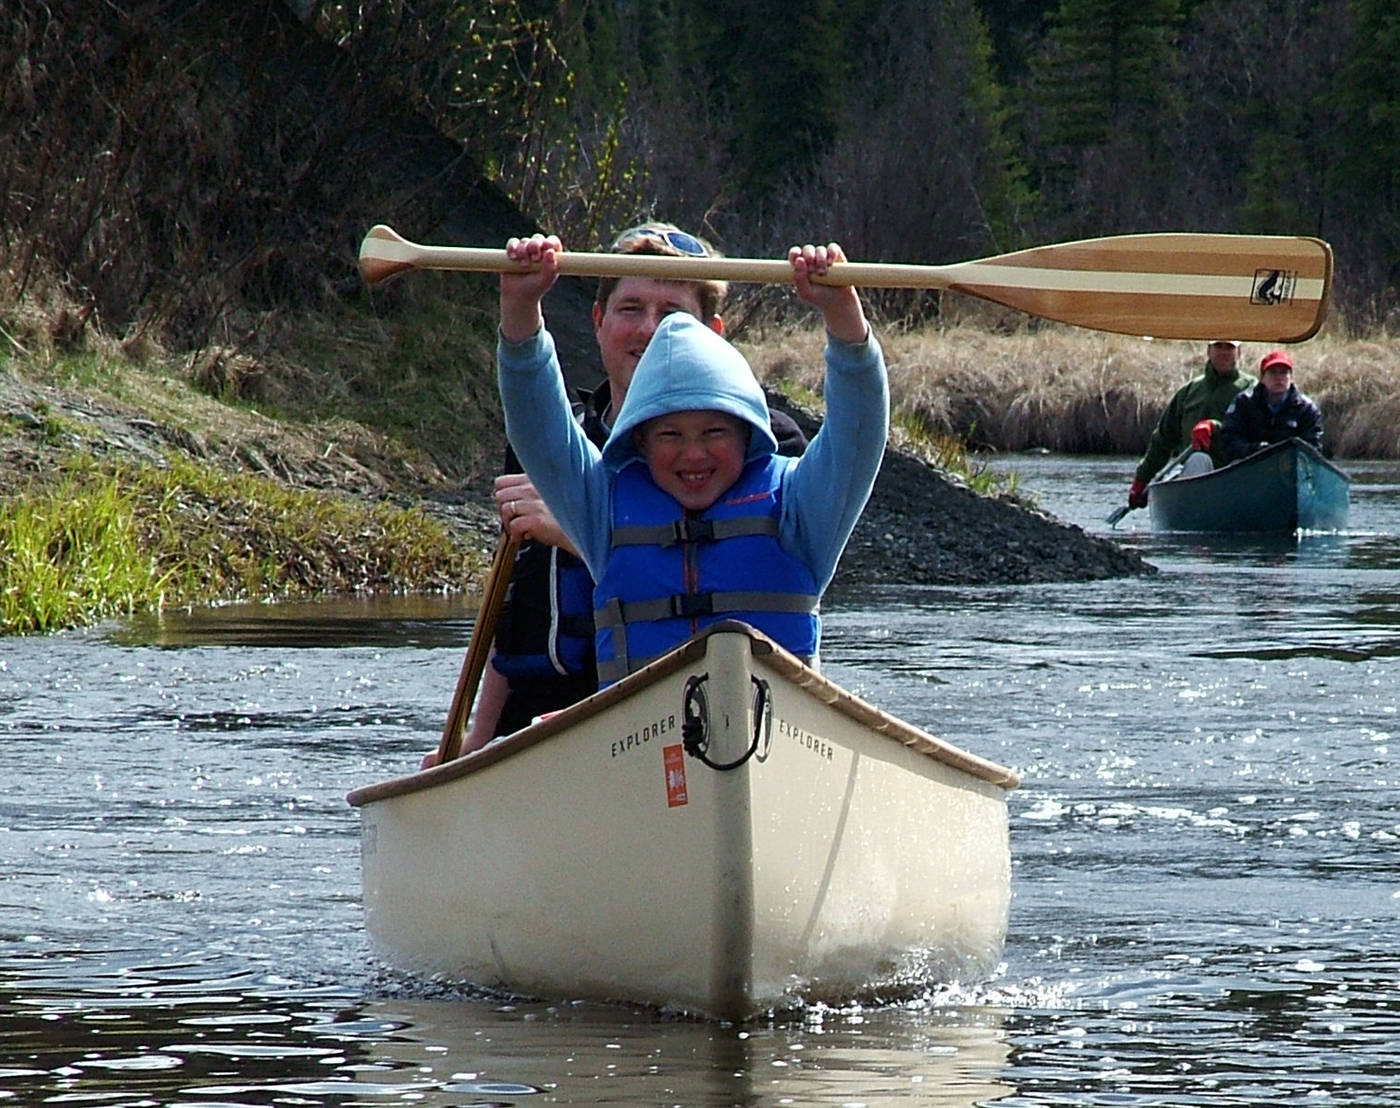 In this May 2008 photo, Billy Morrow shows his enthusiasm for a paddling trip with his father, Clarion editor Will Morrow, on the Swanson River, part of the Kenai National Wildlife Refuge’s canoe trails.